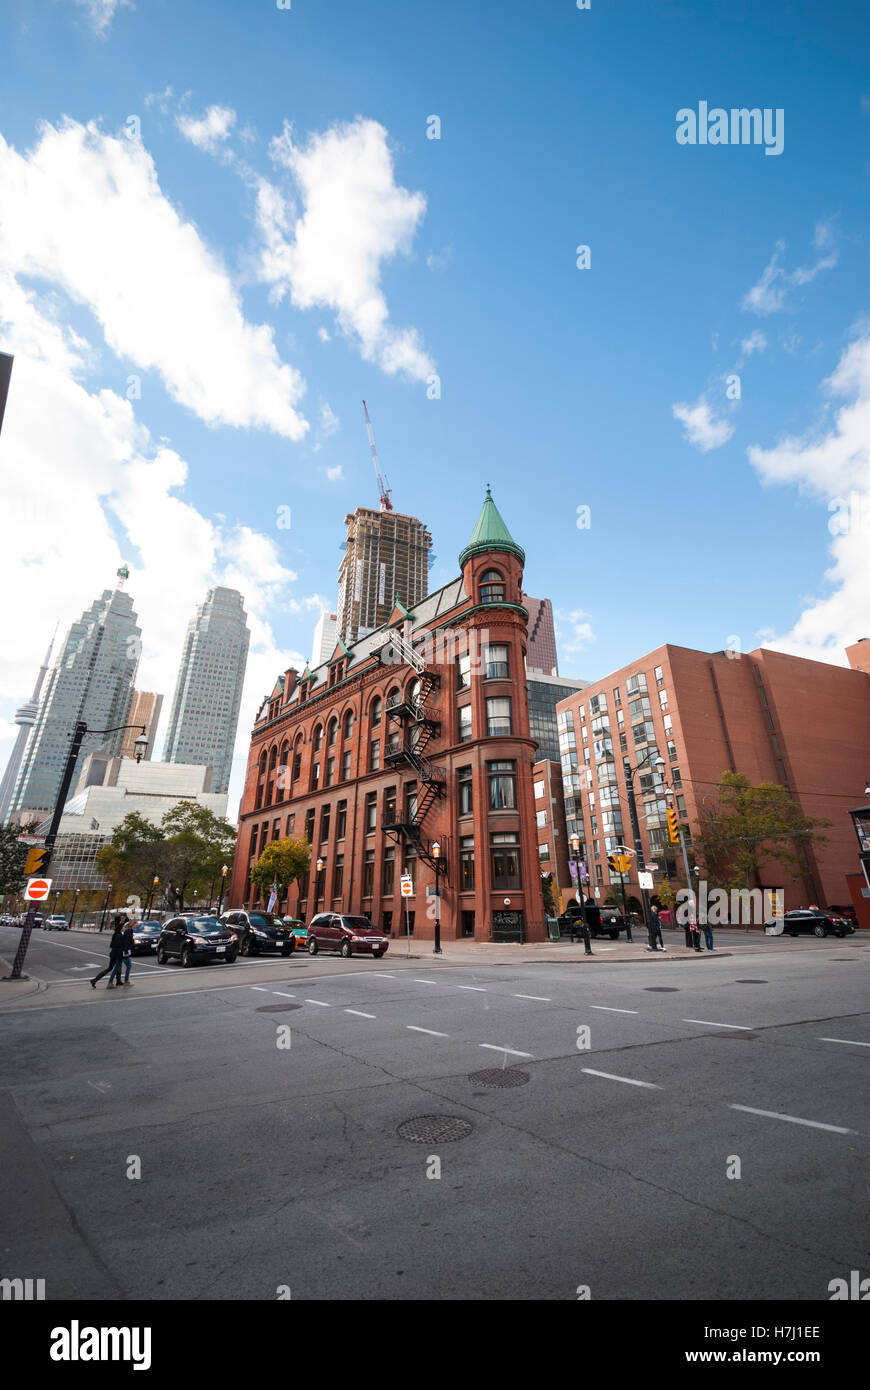 The historic 1892 Gooderham building a flatiron styled structure which divides Wellington and Front streets in downtown Toronto. Stock Photo